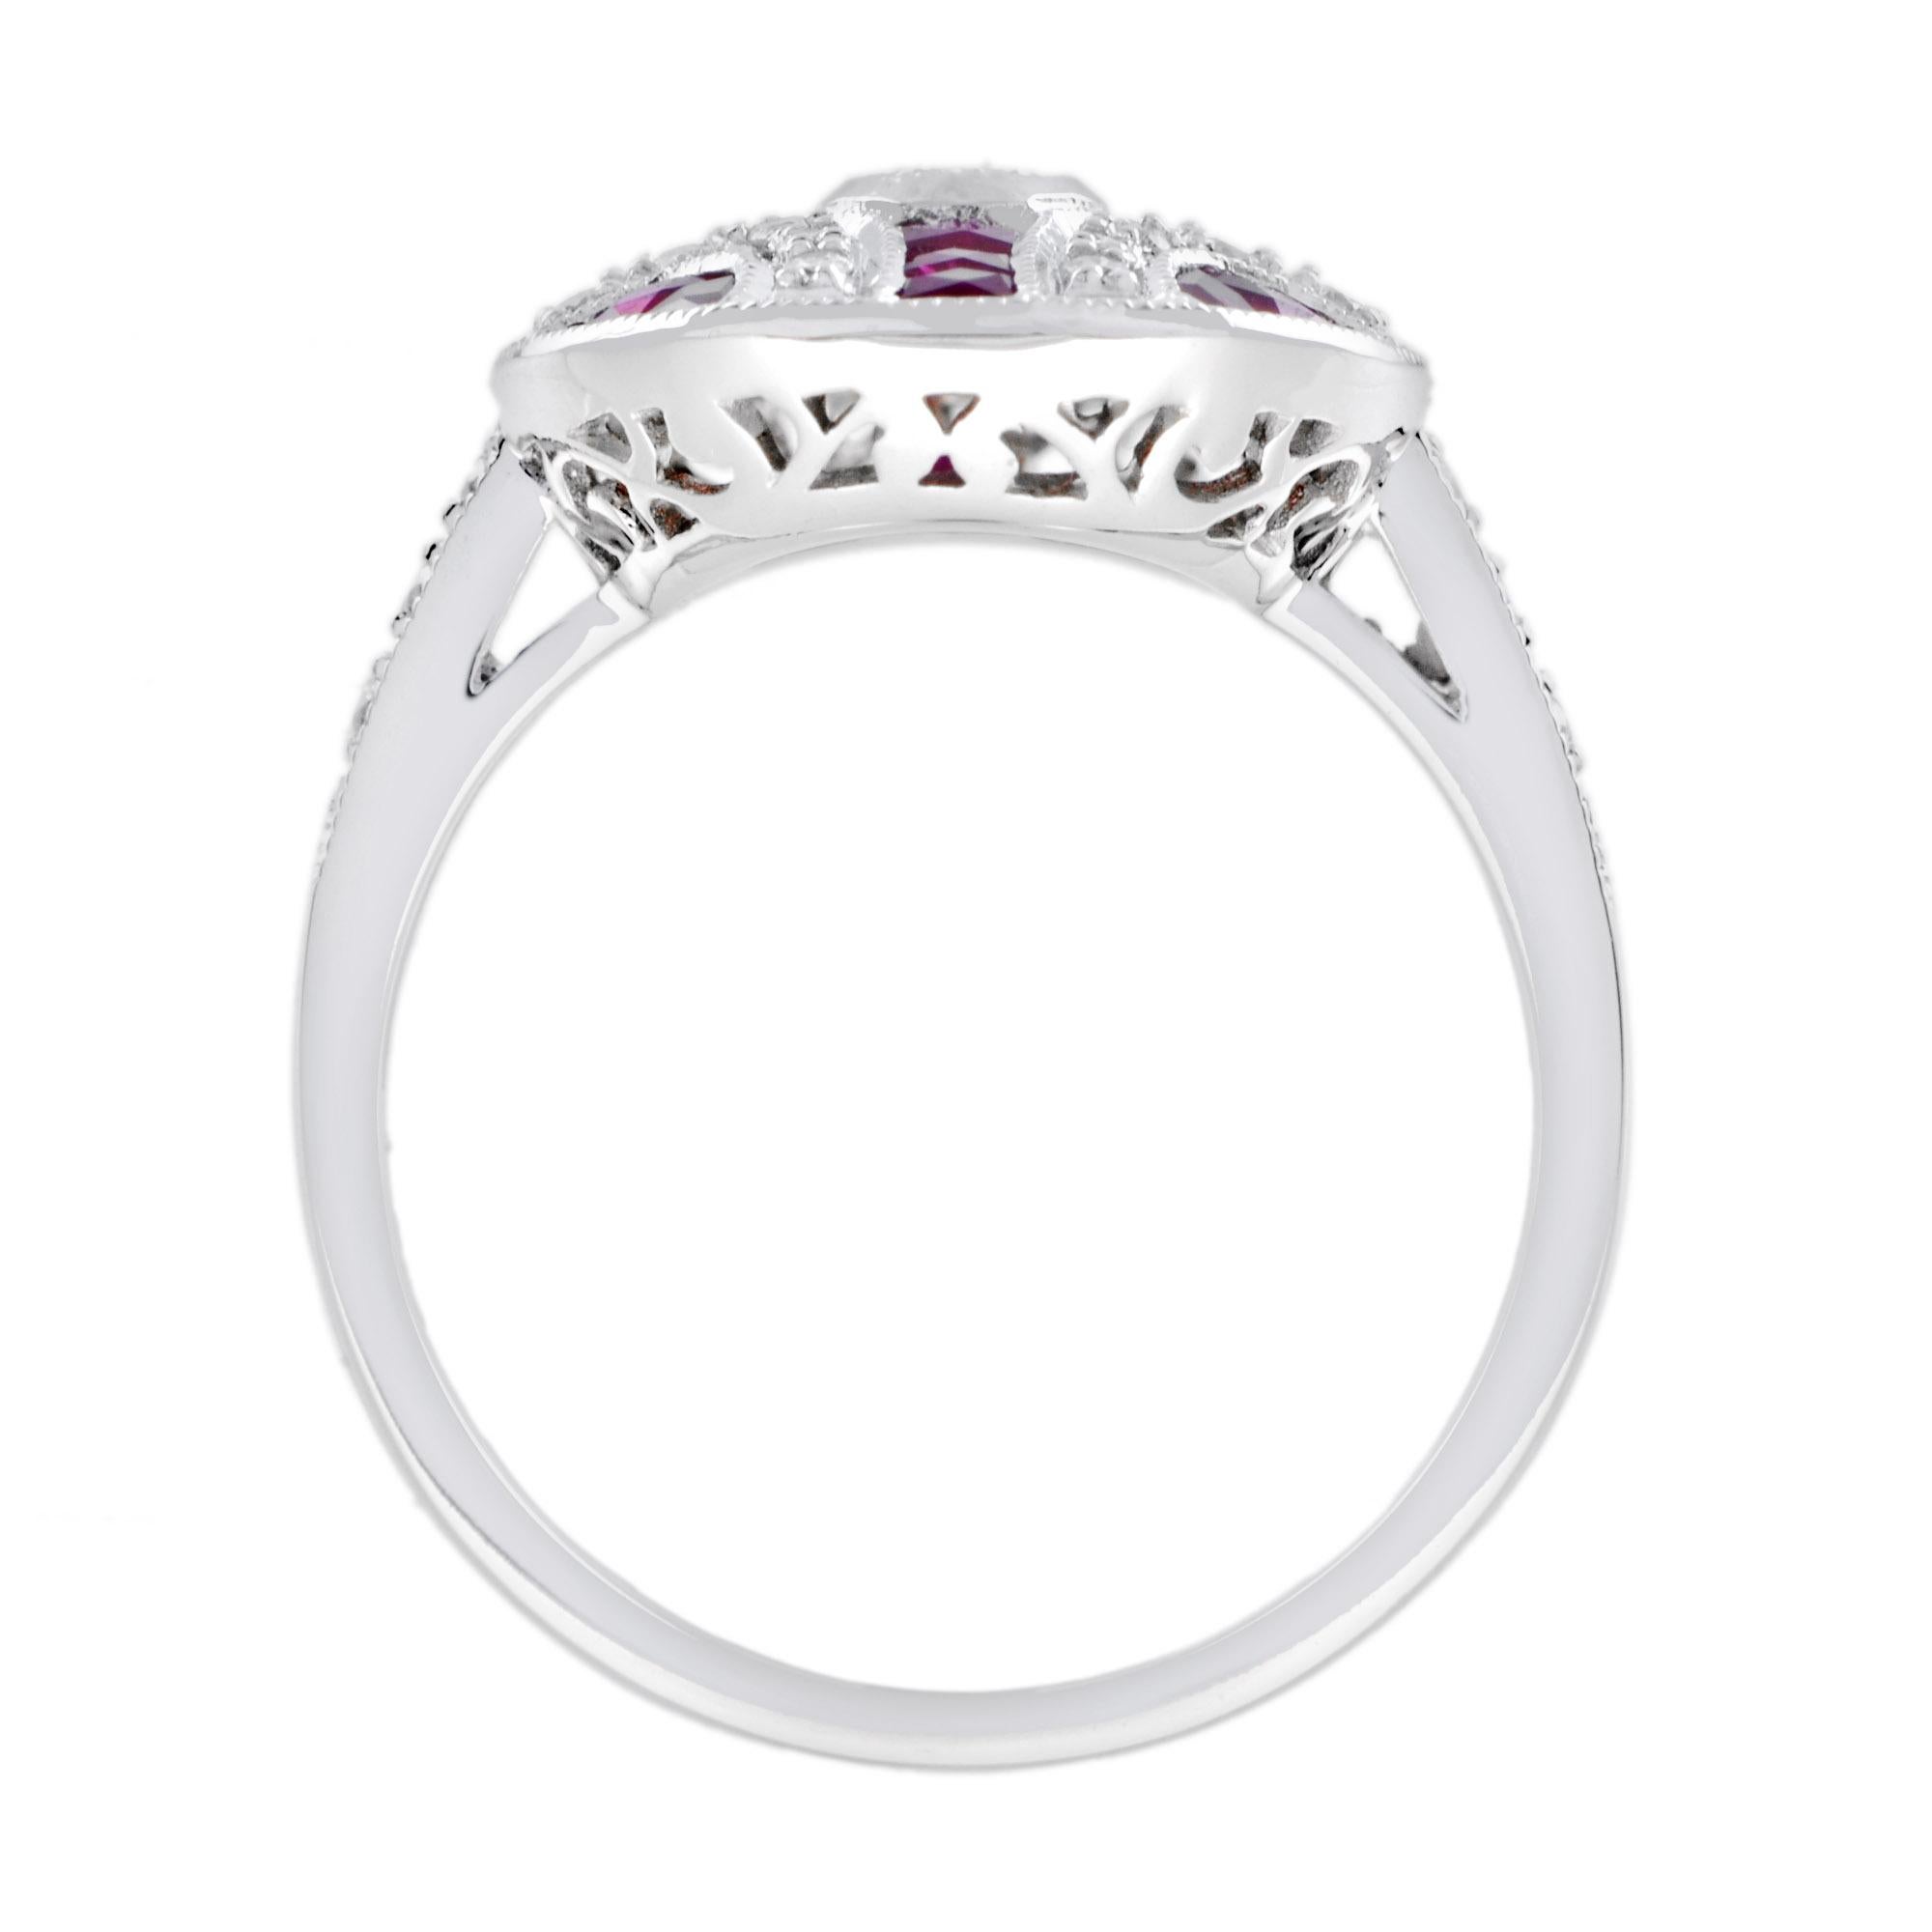 Diamond and Ruby Art Deco Style Engagement Ring in 14K White Gold For Sale 1